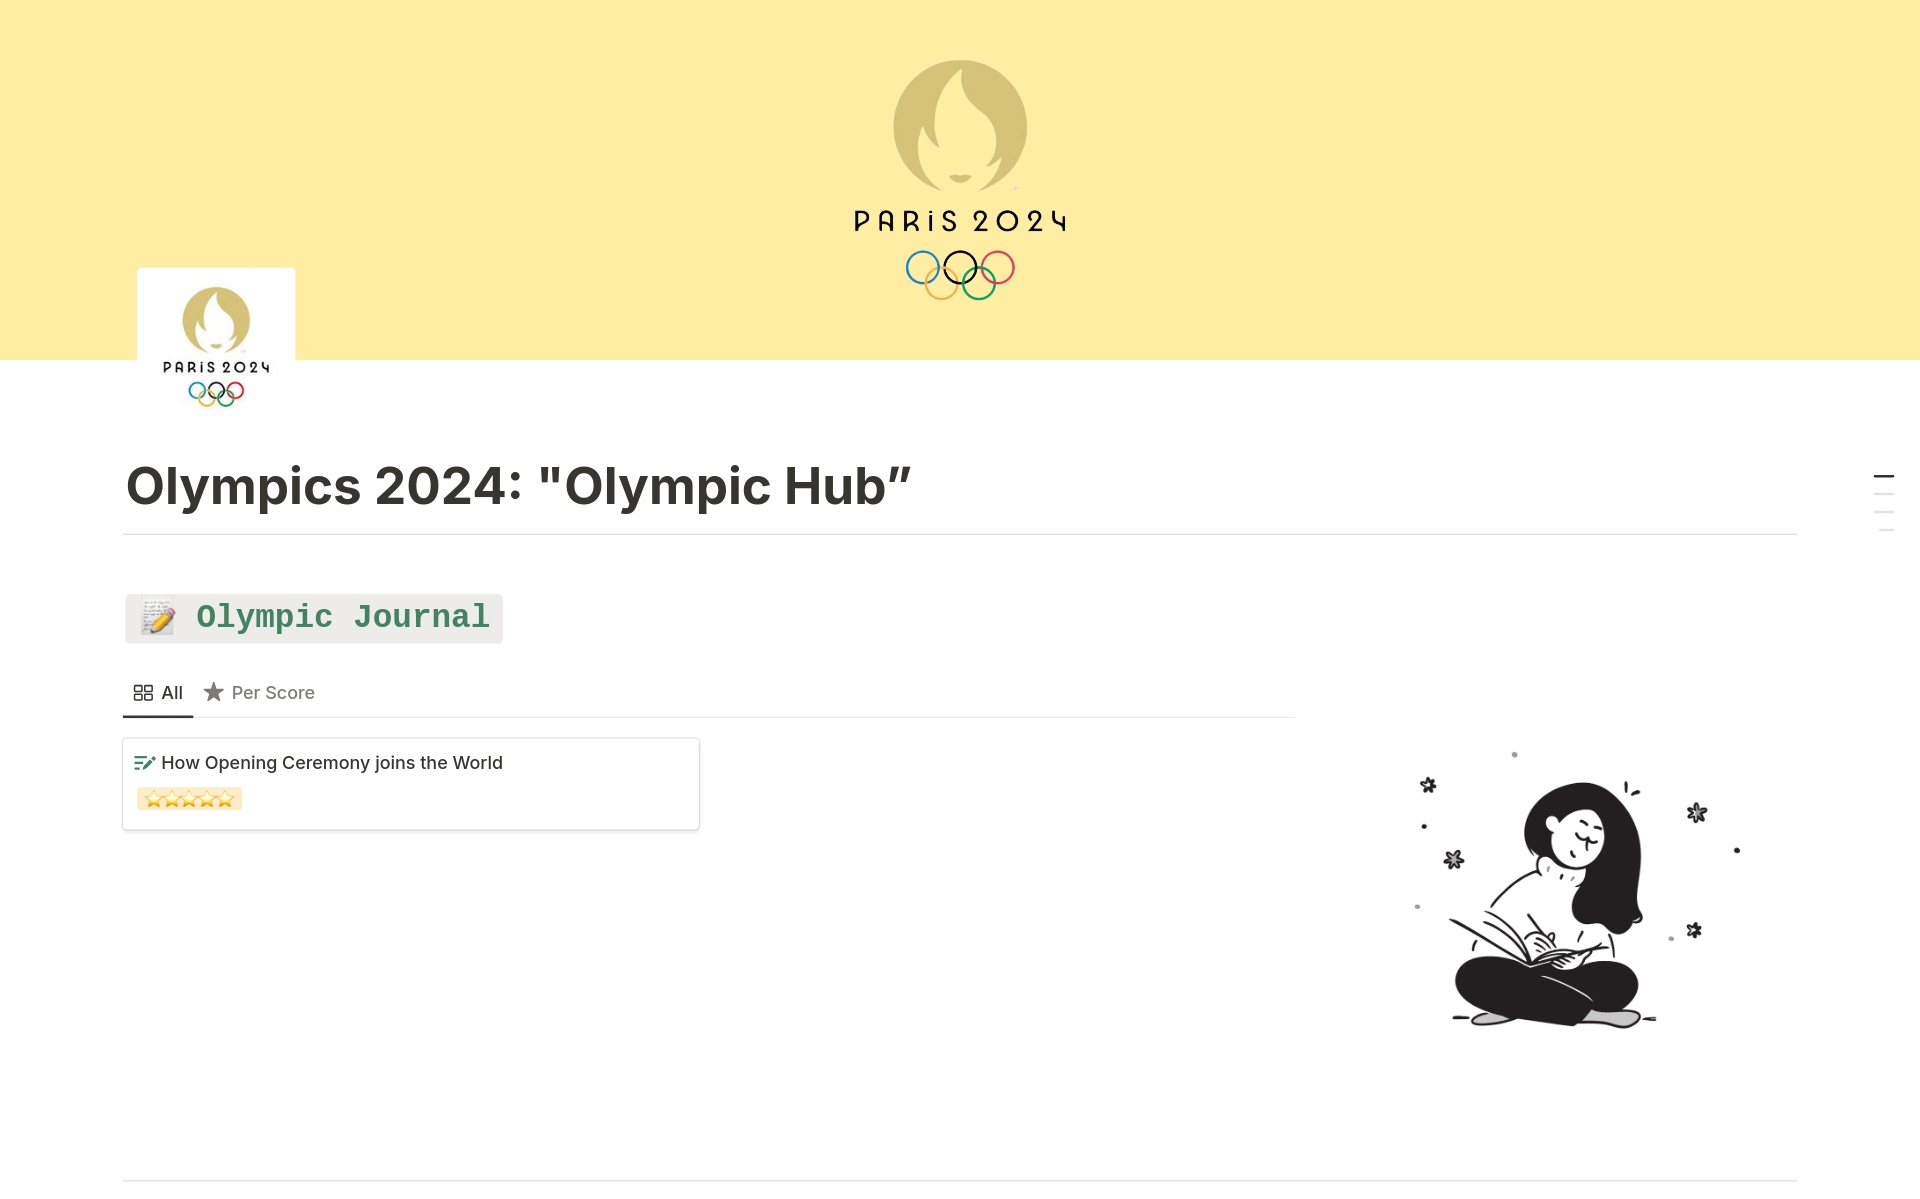 The Olympics 2024: "Olympic Hub" template is a central hub for all things related to the upcoming Olympics. It includes sections for:

- ⚽ Sports and events tracking
- 📝 Olympic journal
- 🗣️ Community discussions
- 📱 Social media updates